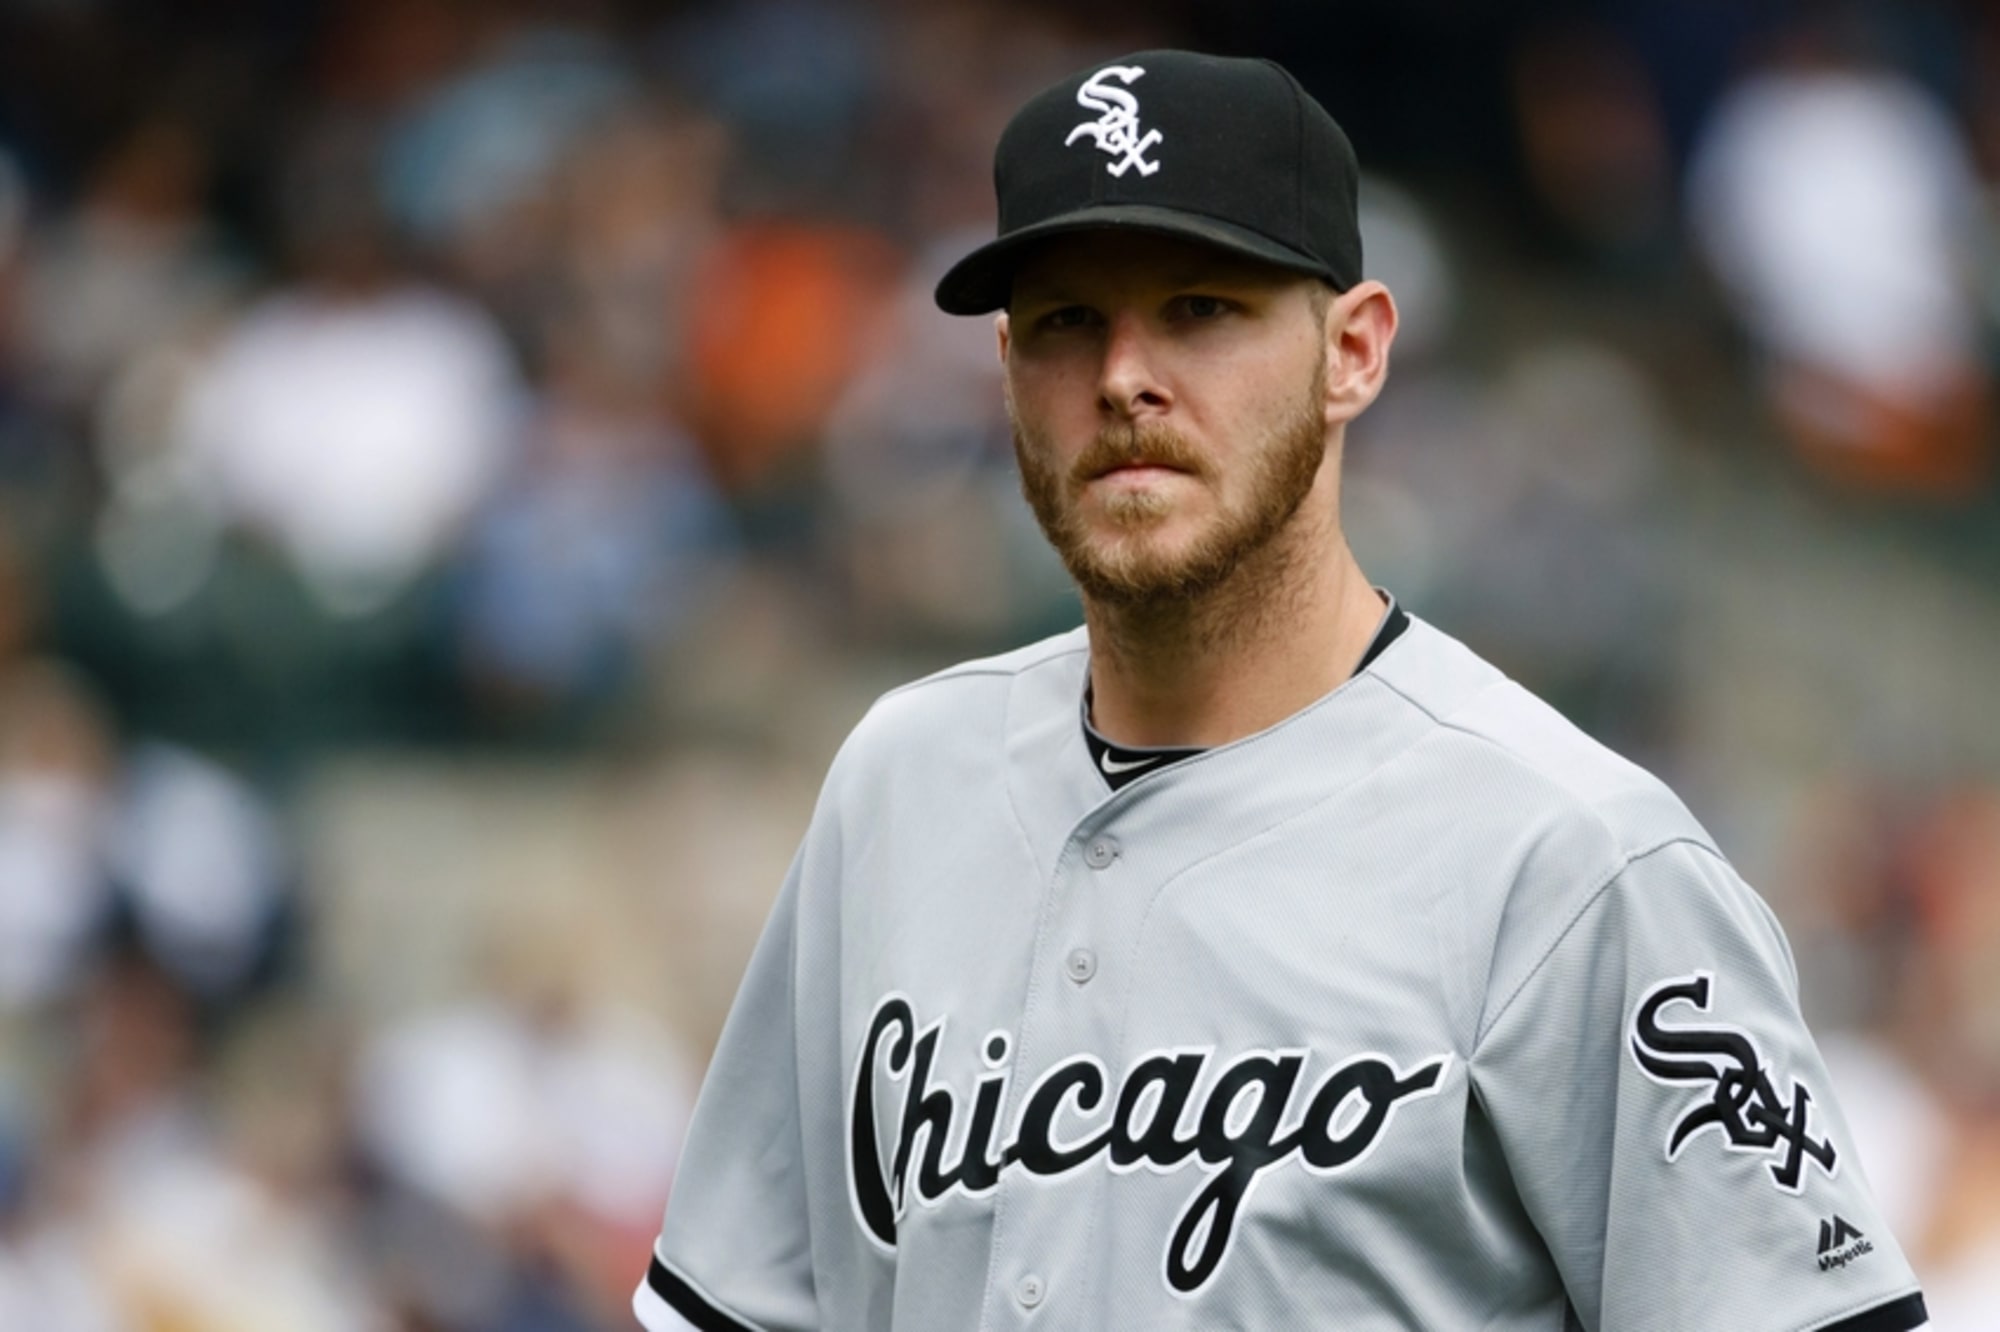 Chris Sale cut up all of the White Sox' throwback jerseys because